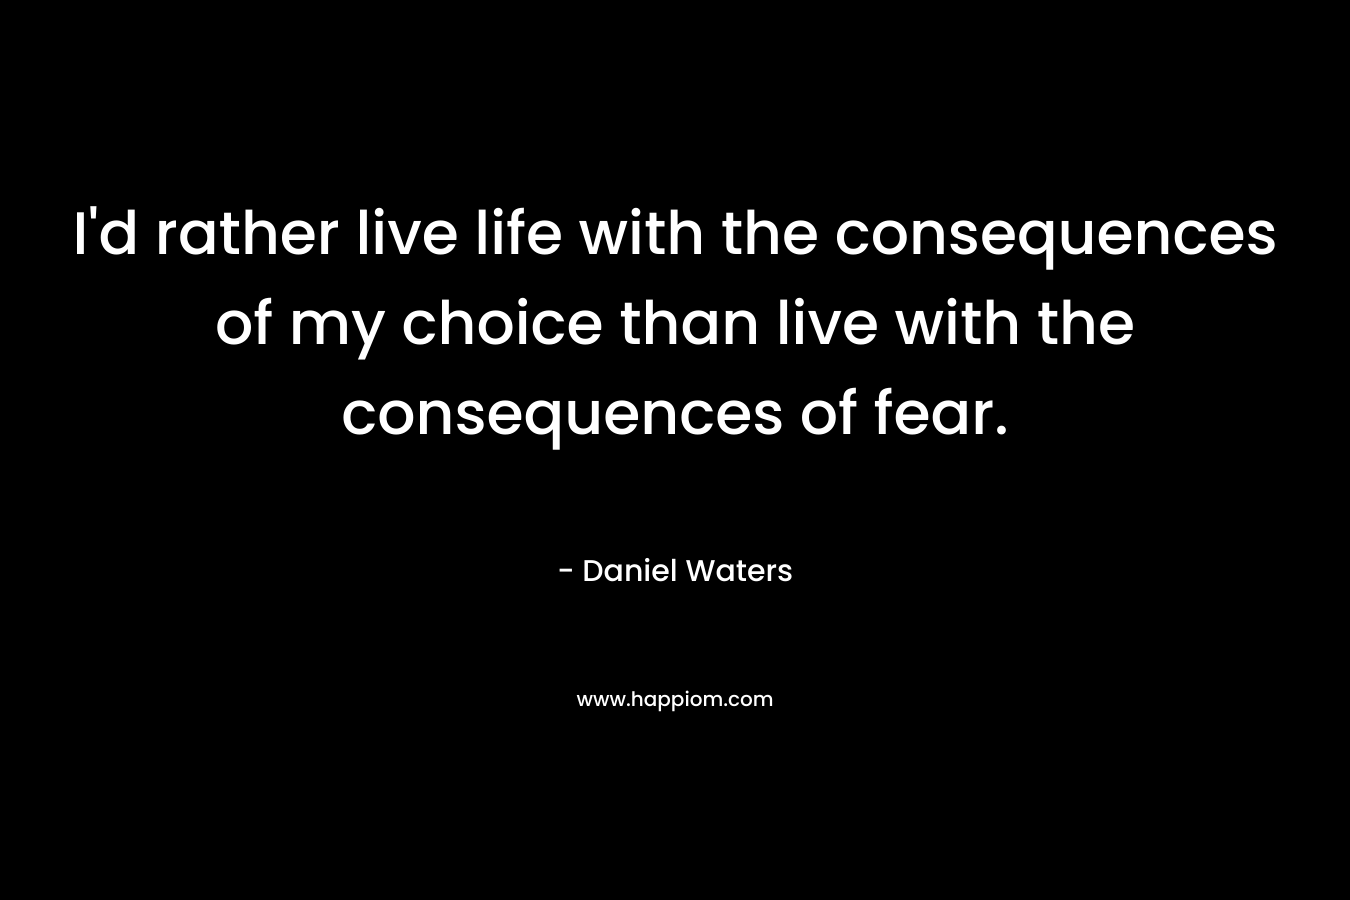 I'd rather live life with the consequences of my choice than live with the consequences of fear.